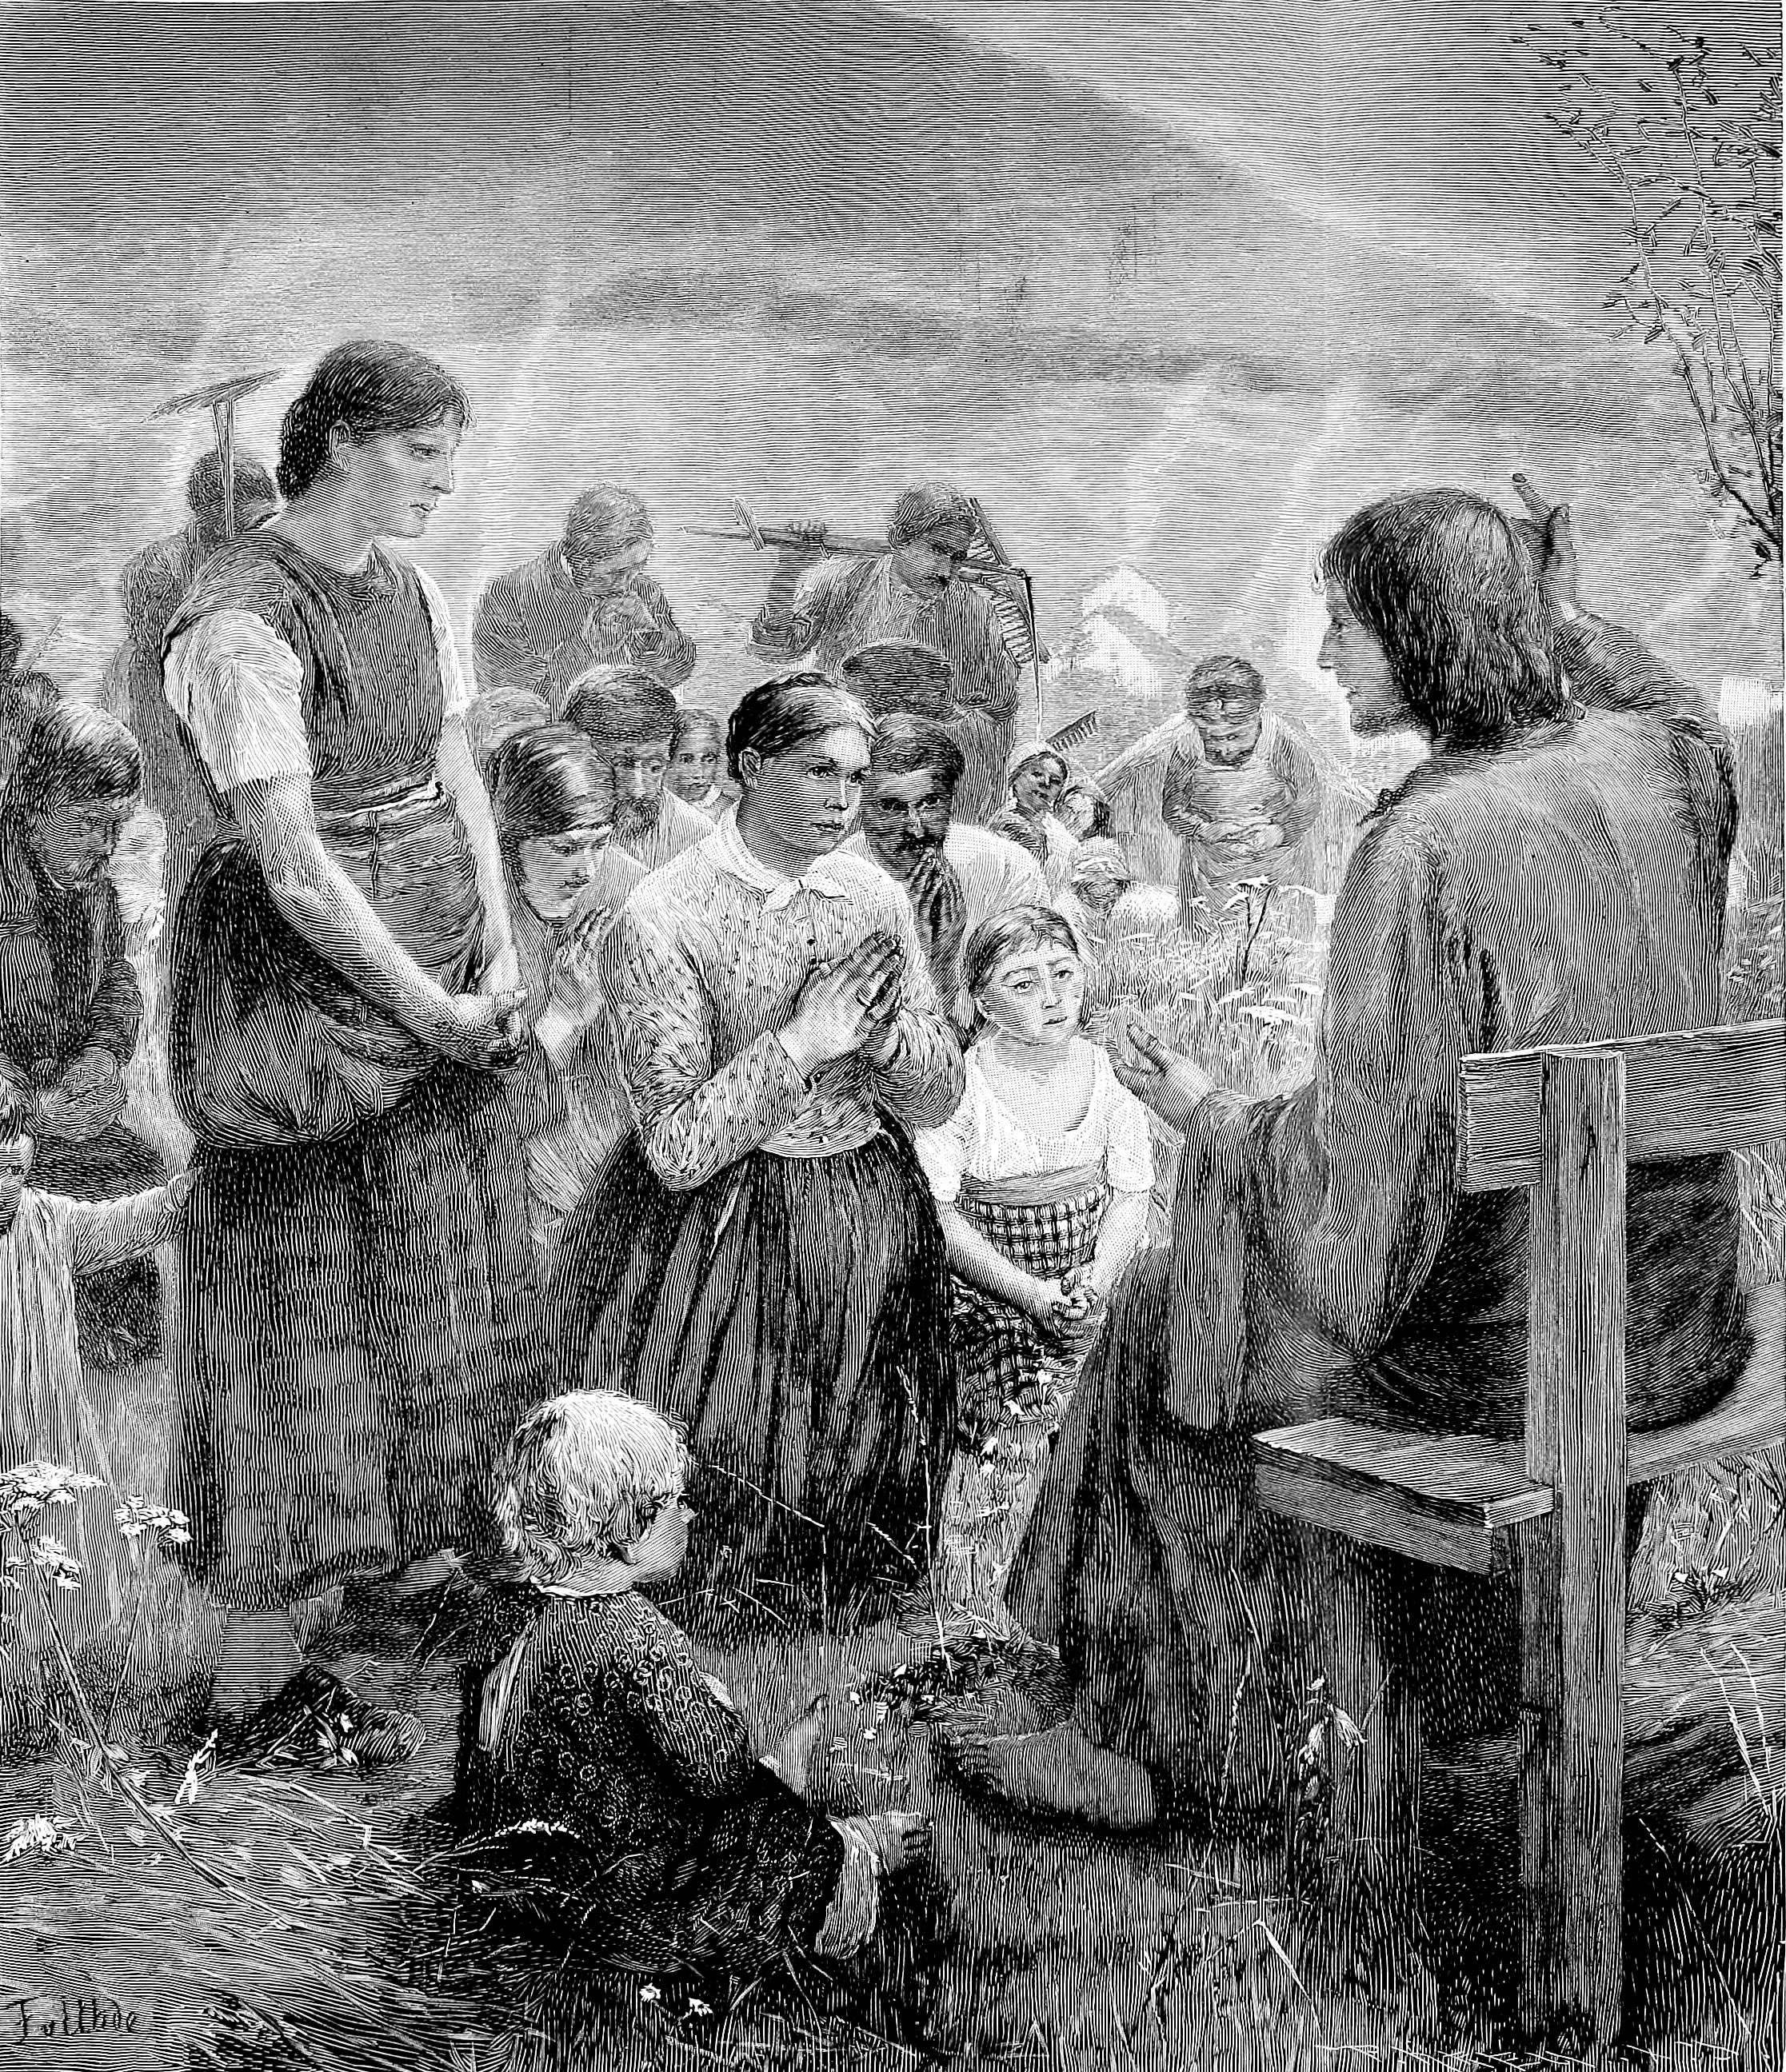 Die Bergpredigt (1887). The sermon on the mount, by Uhde